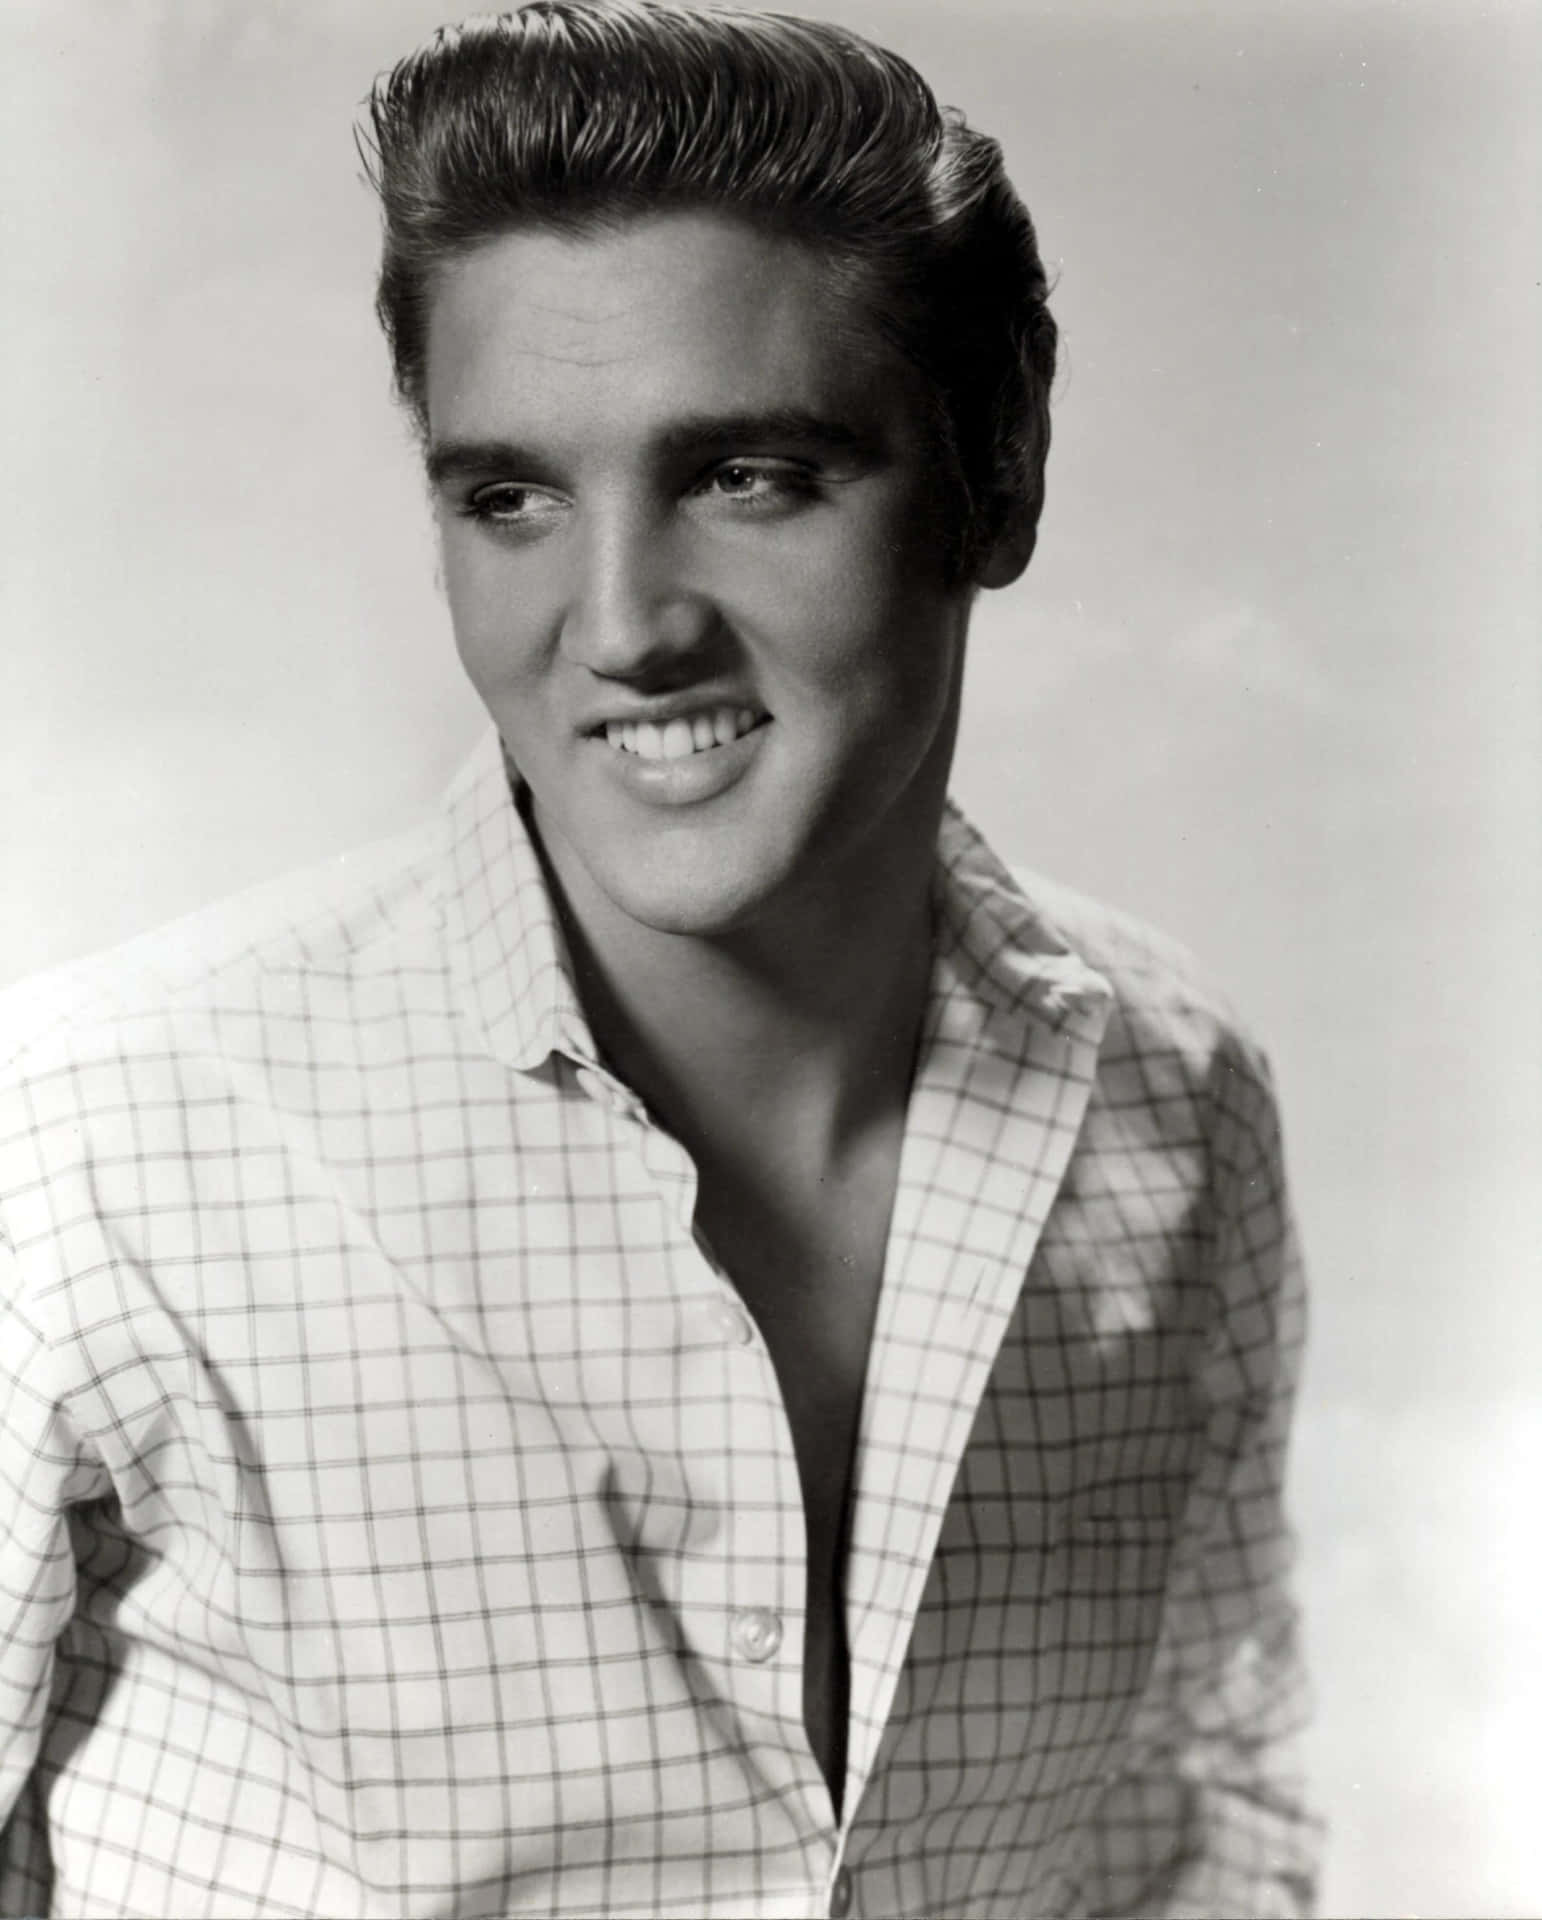 Elvis Presley, The King of Rock and Roll